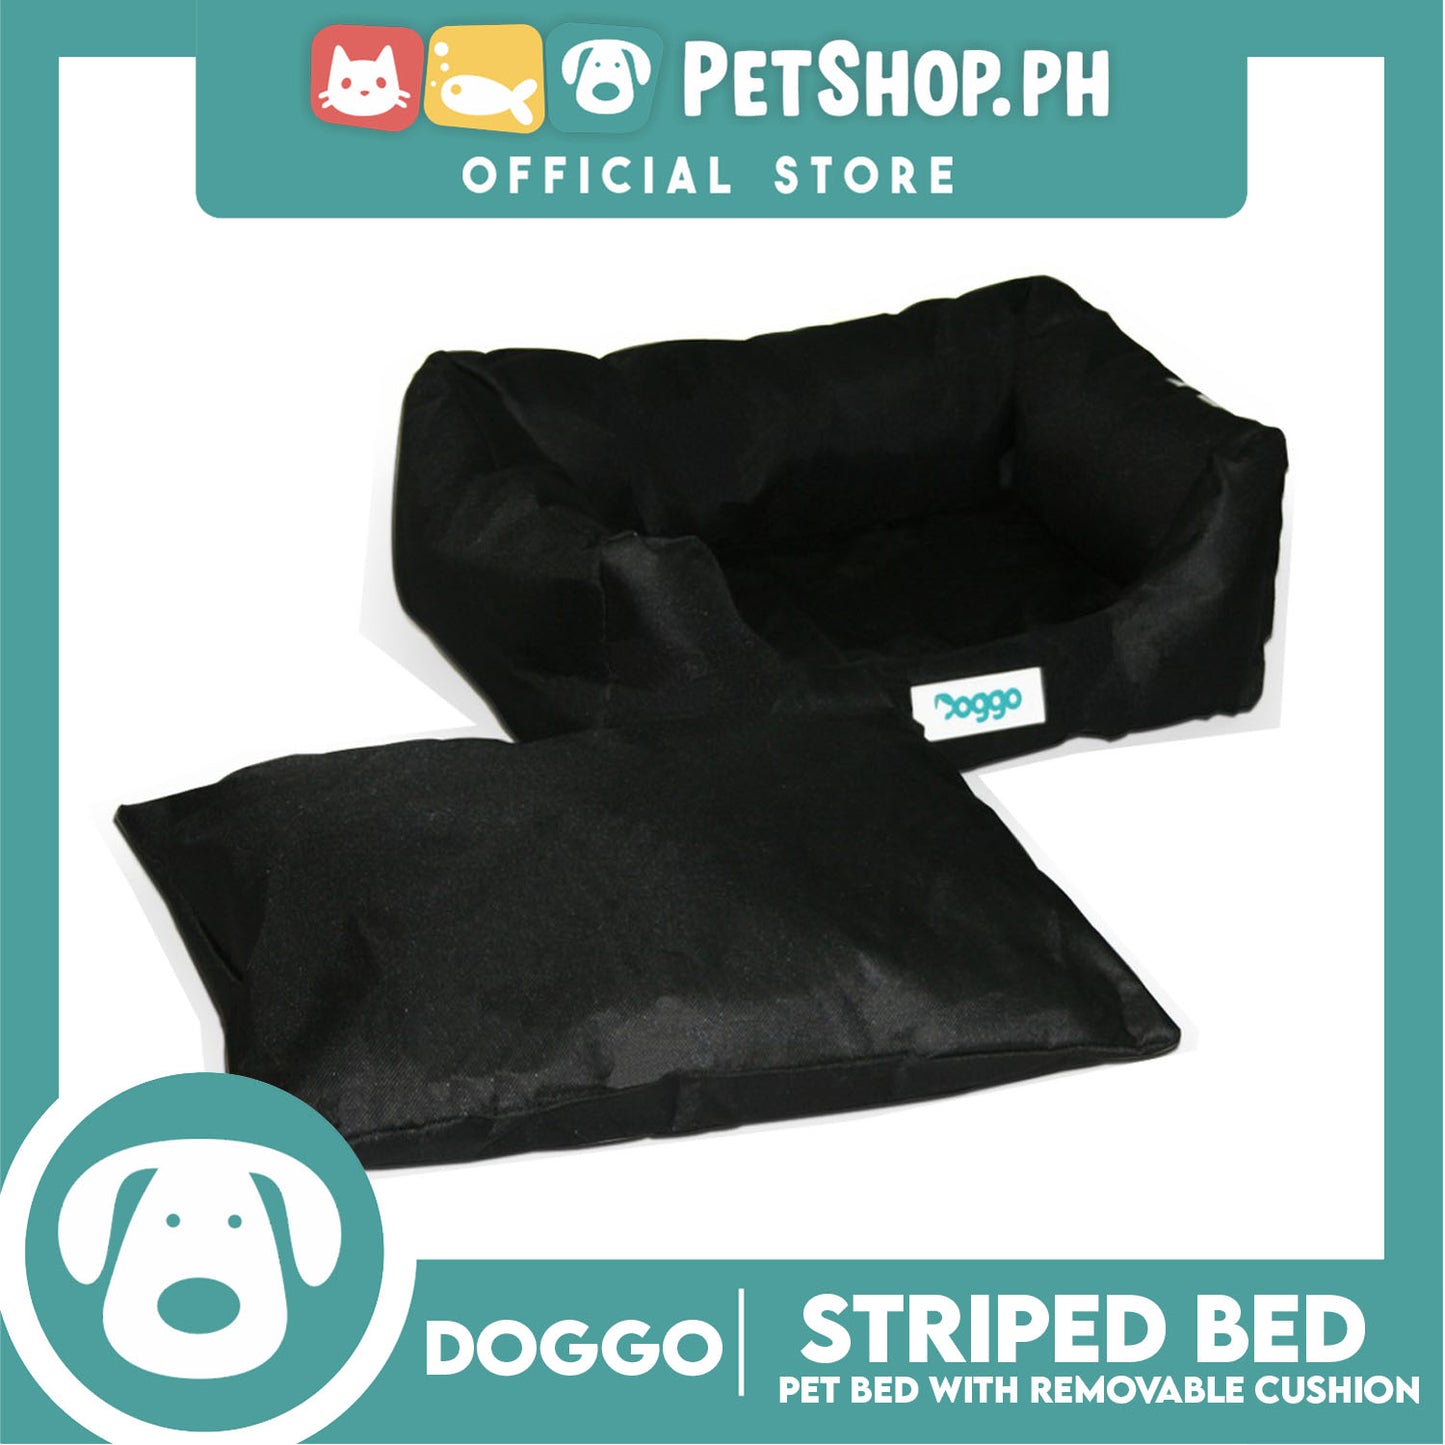 Doggo Striped Bed Black with White Striped (Medium) with Removable Cushion